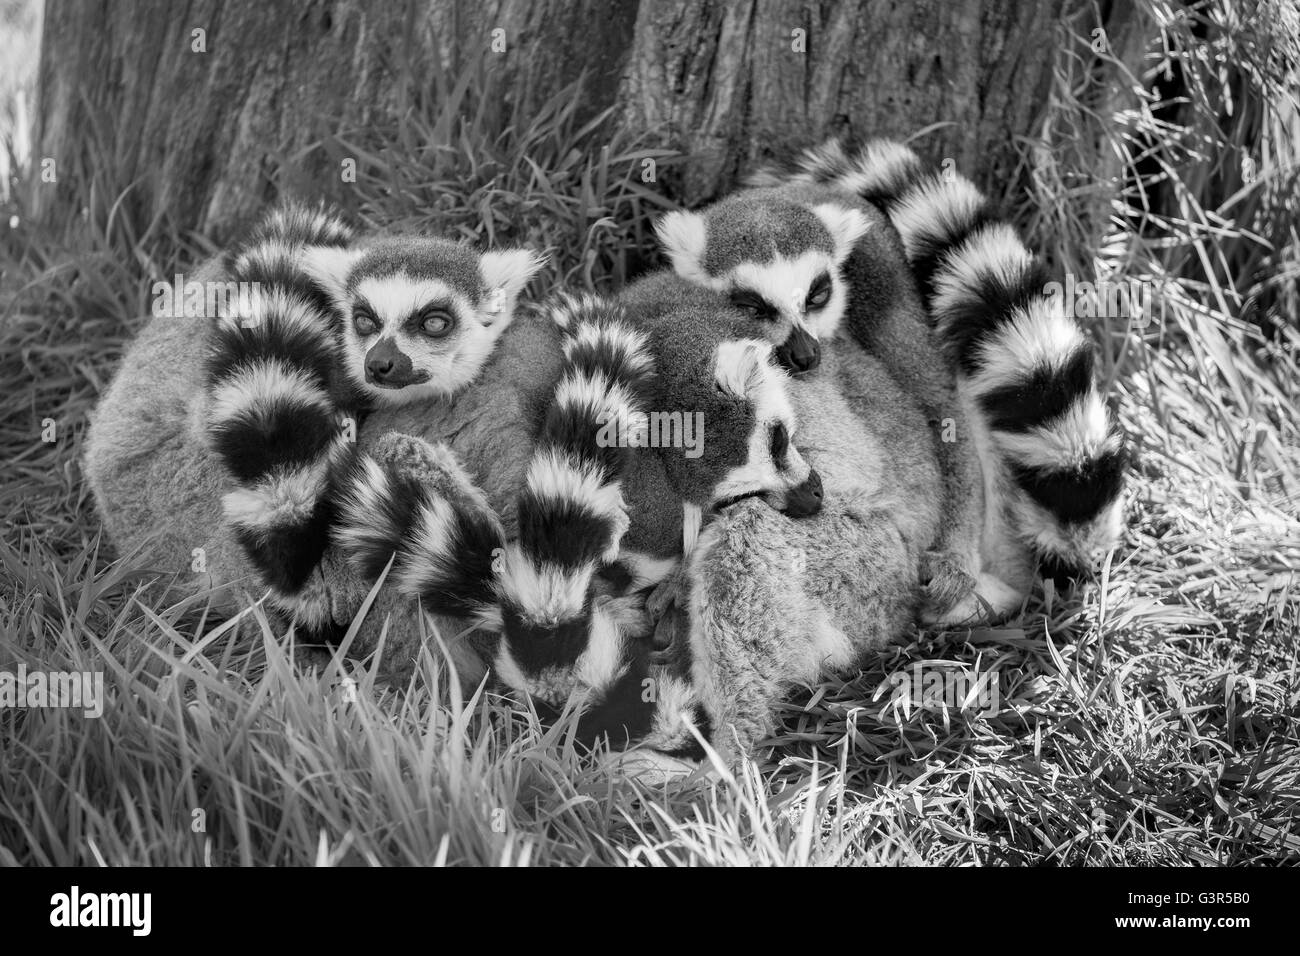 Black and white image of a group of sleeping Ring Tailed Lemurs. Stock Photo